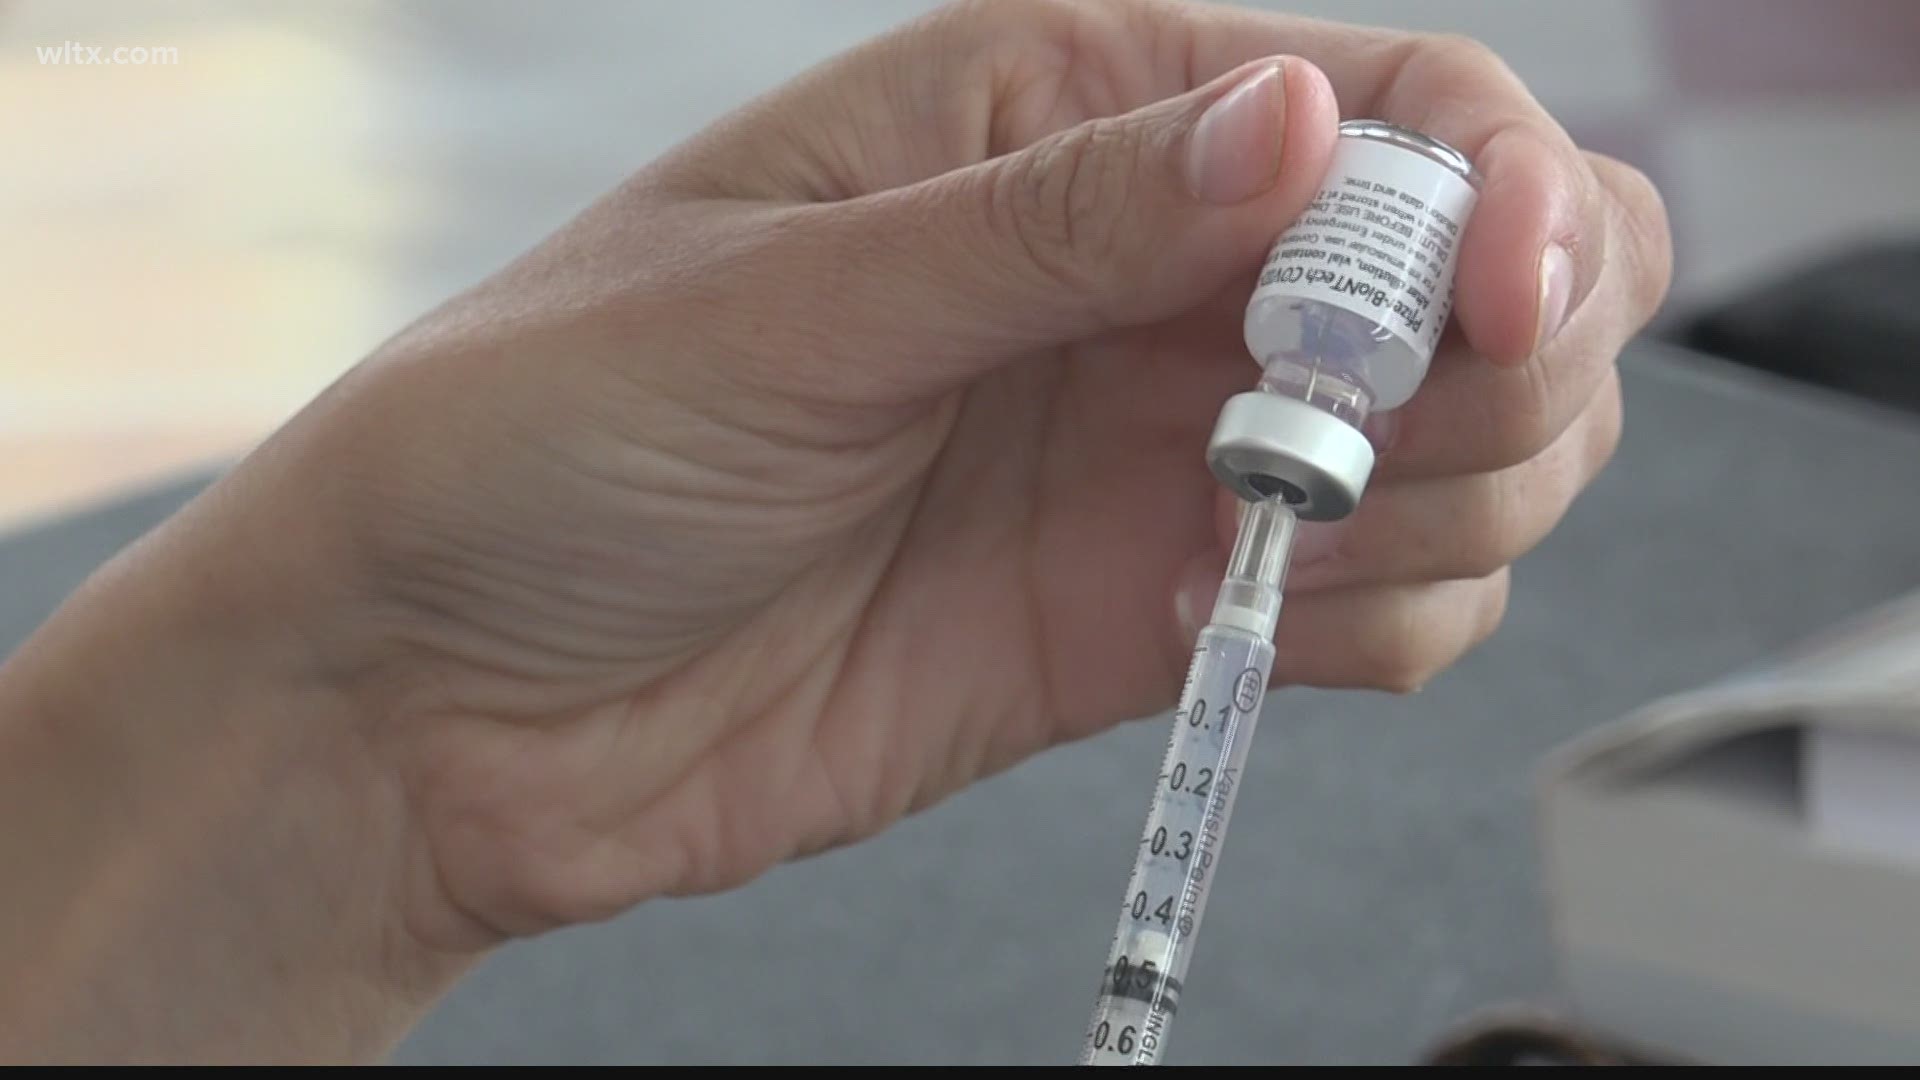 One teen talks about her experience and why she wanted to get the vaccine.